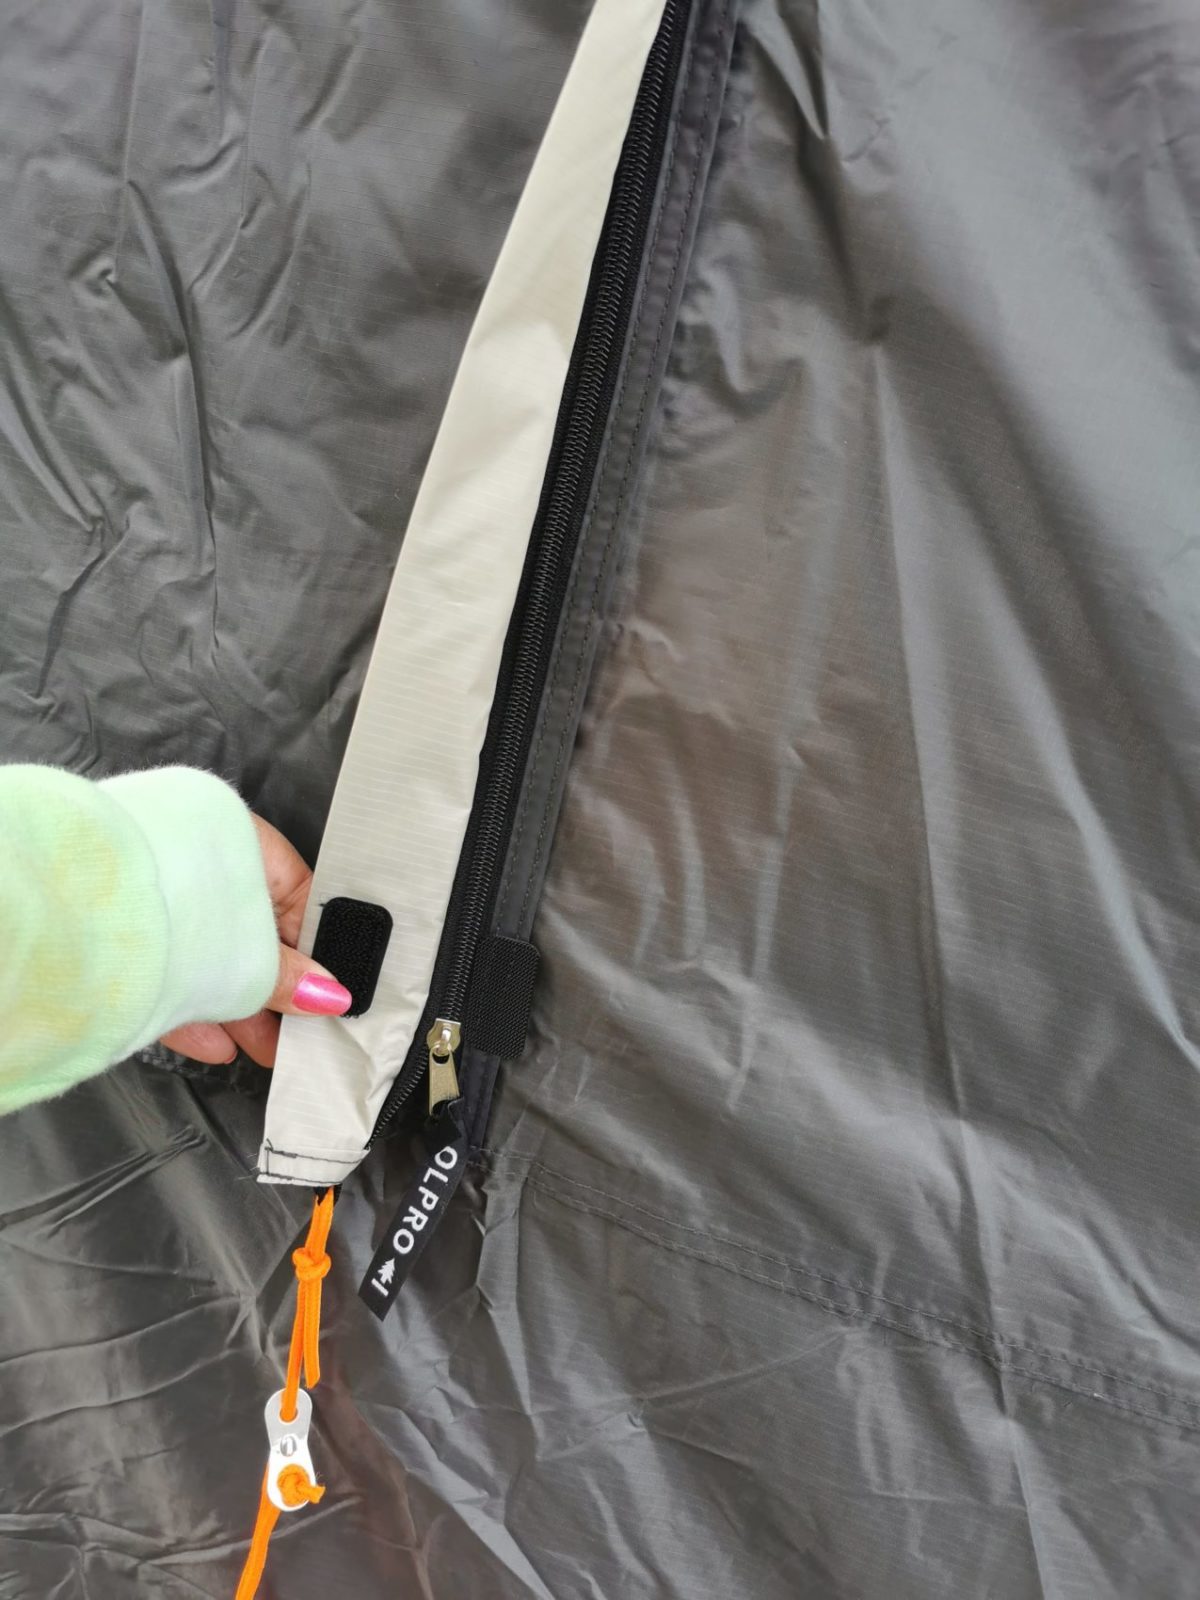 TENTS | Unexpected Features & Great Value - OLPRO Orion 6 Pole Tent ...